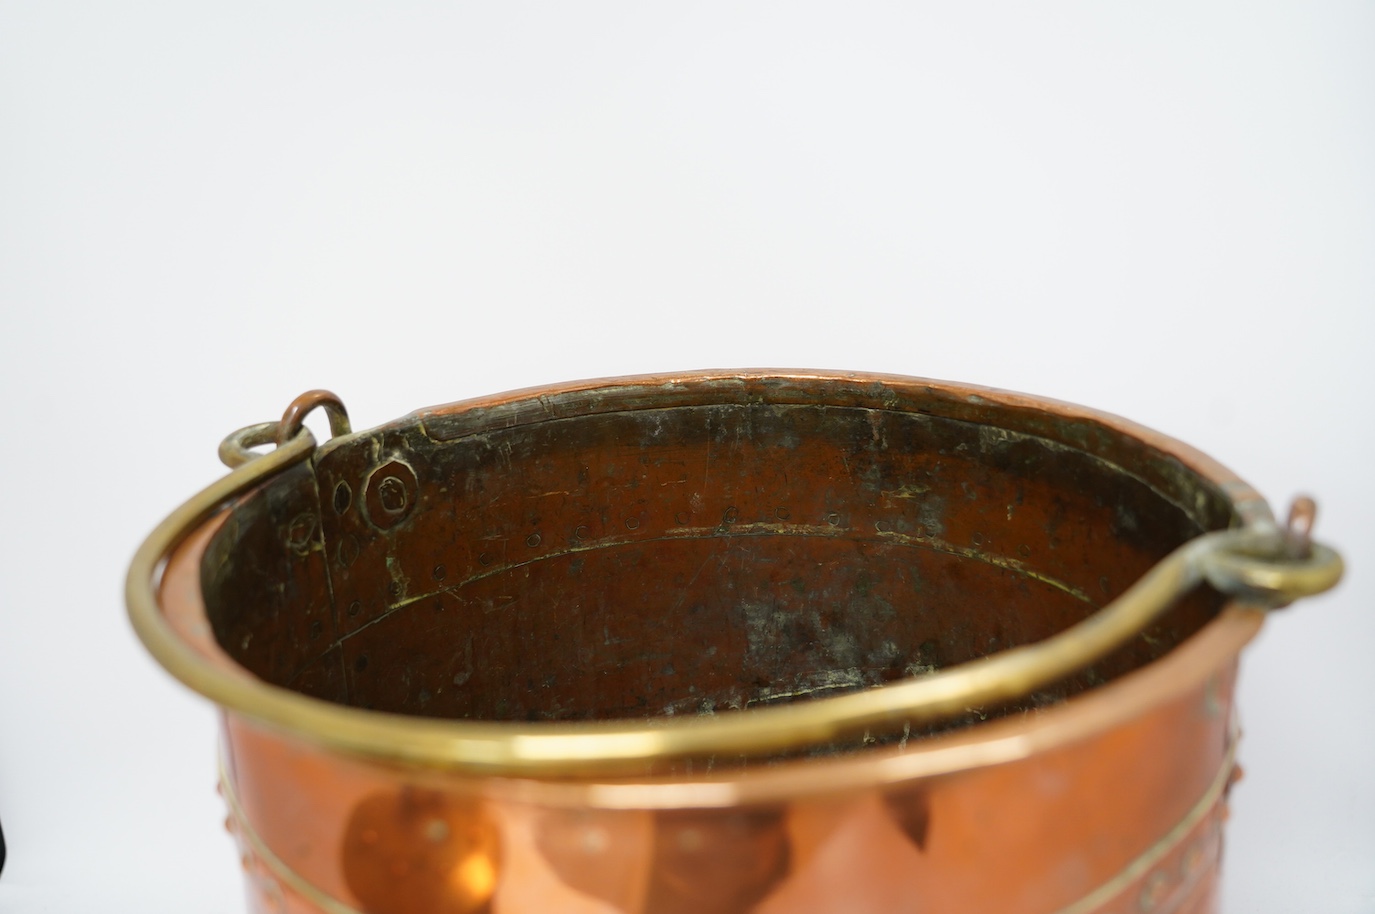 A brass handled copper coal bin and The Protector brass miner’s lamp, coal bin 30cm high. Condition - coal bin has some minor dents, miner’s lamp good